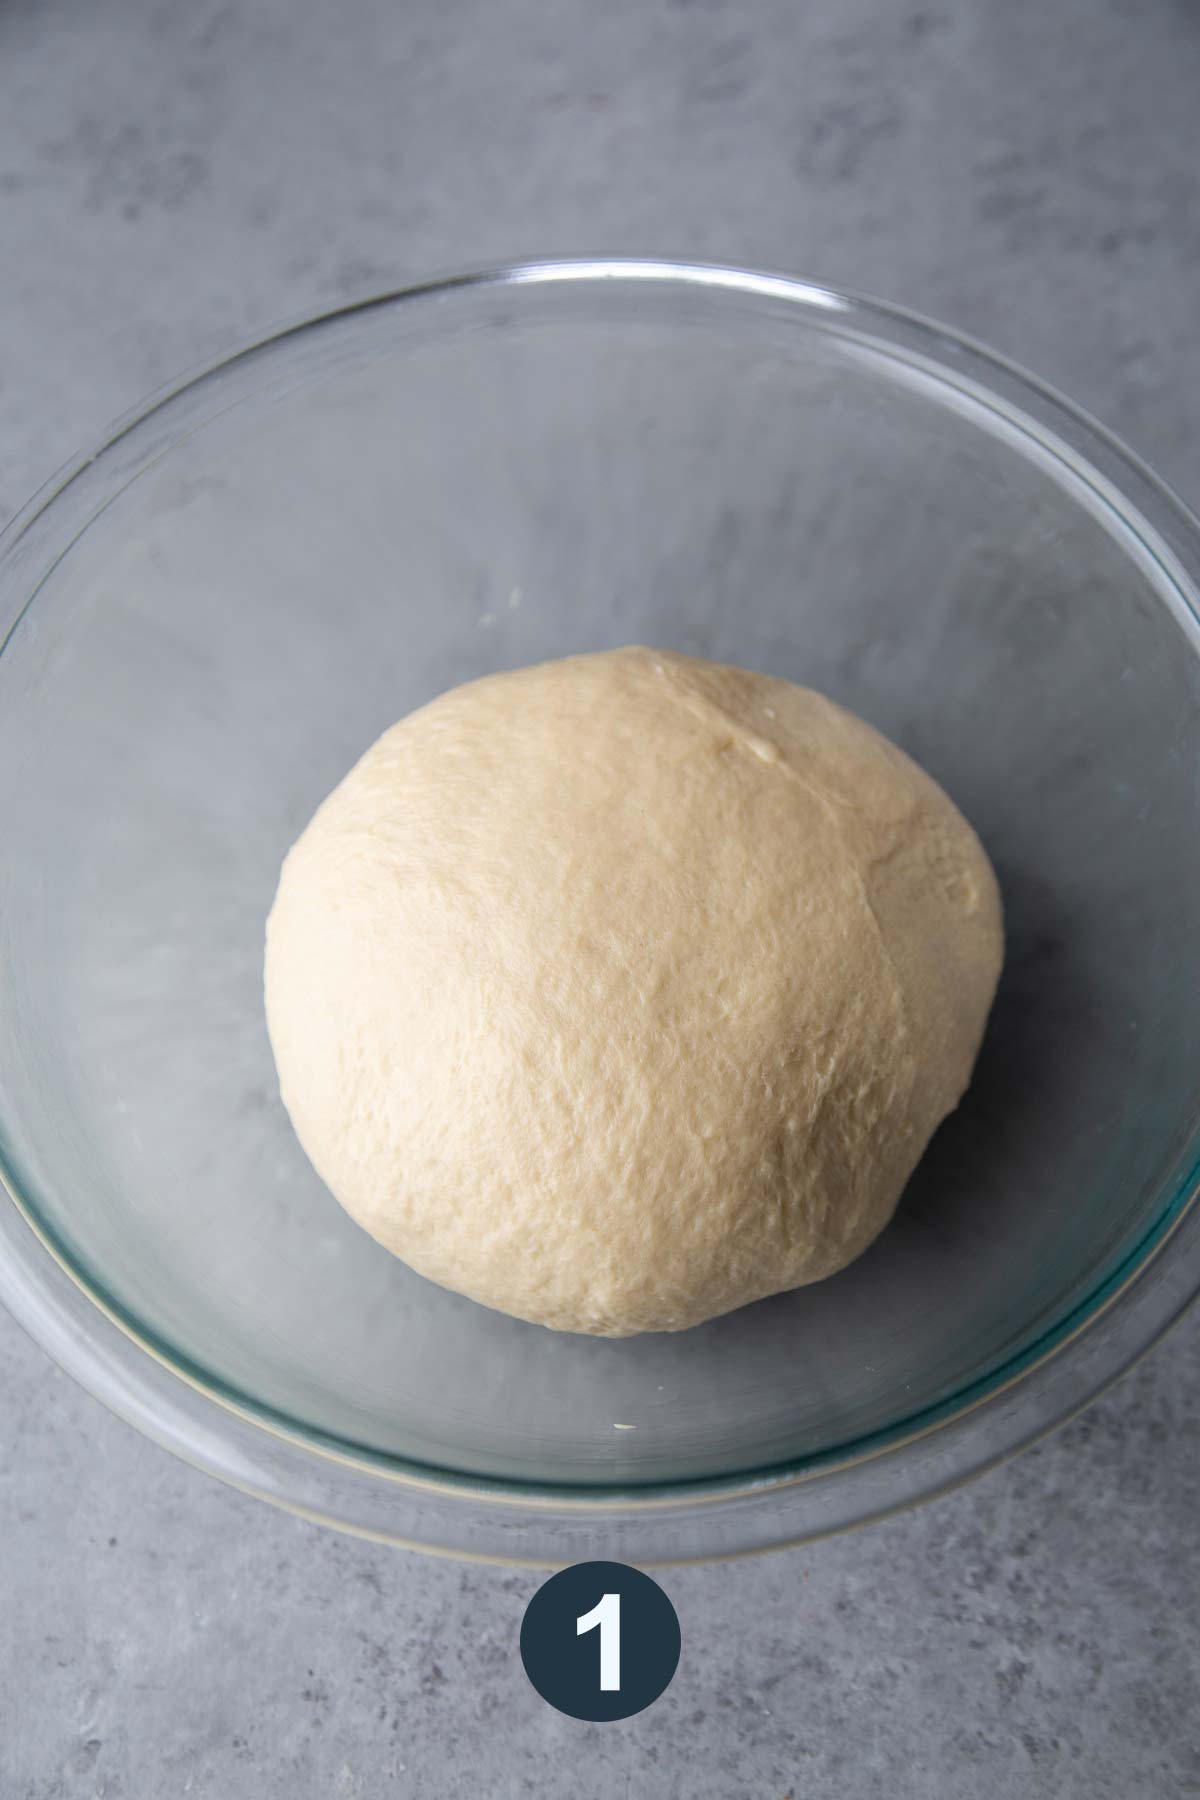 kneaded yeast dough in bowl.